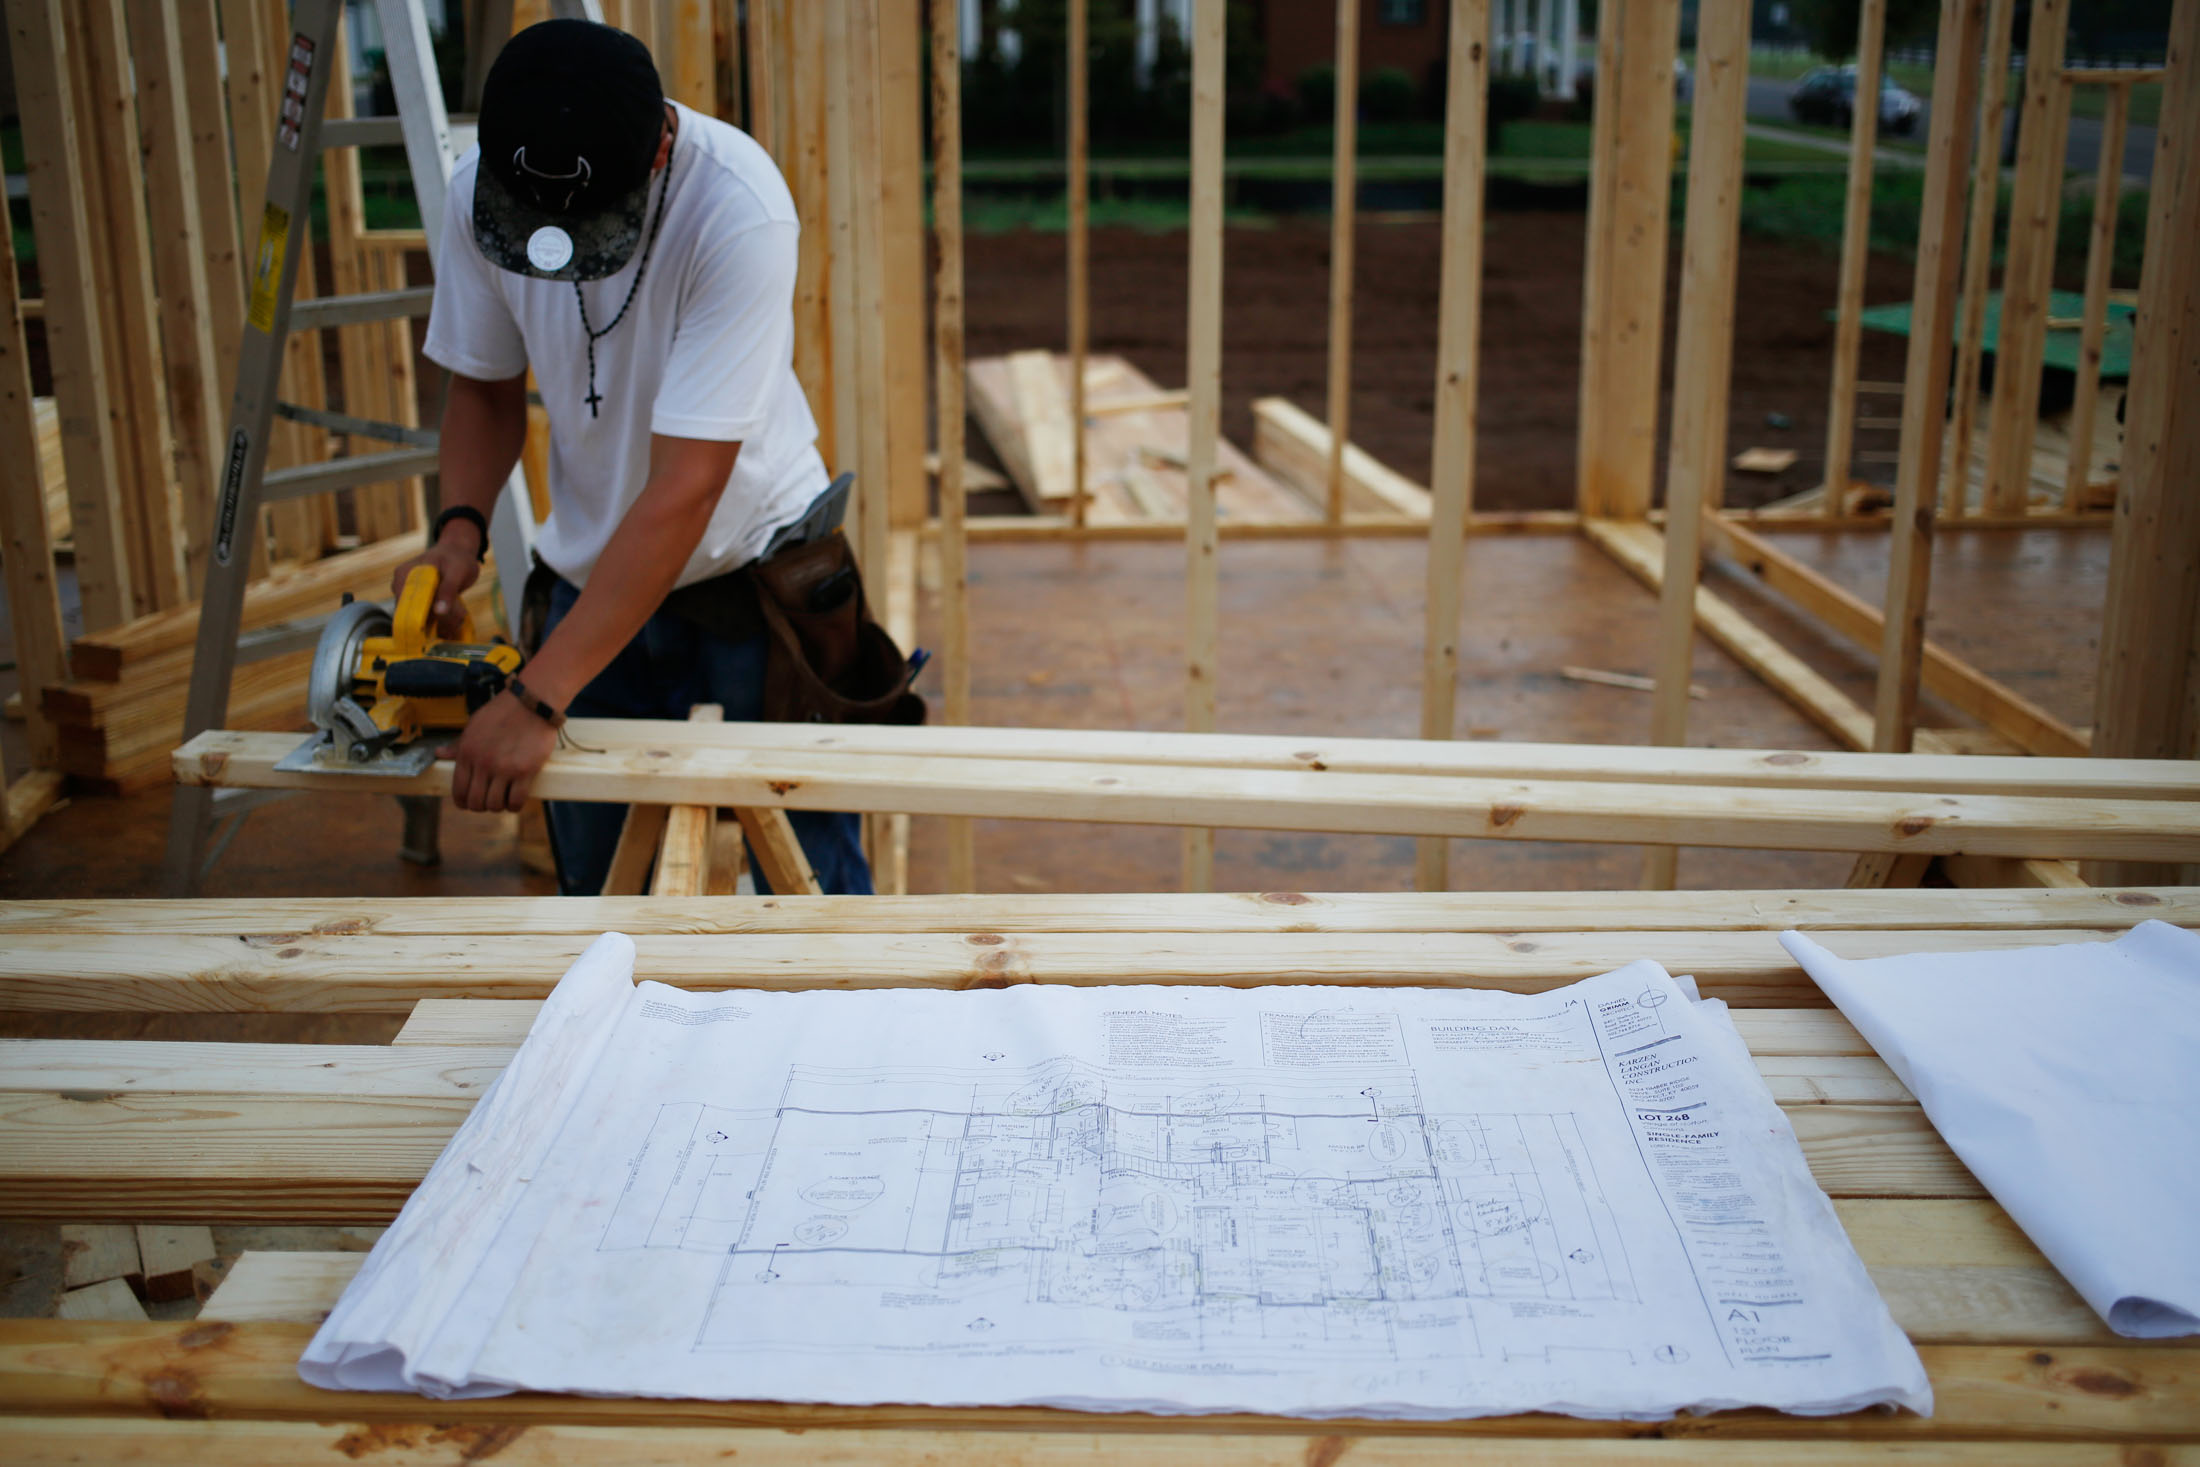 A set of blueprints sit in front of a contractor cutting lumber for a house under construction in Louisville, Kentucky.